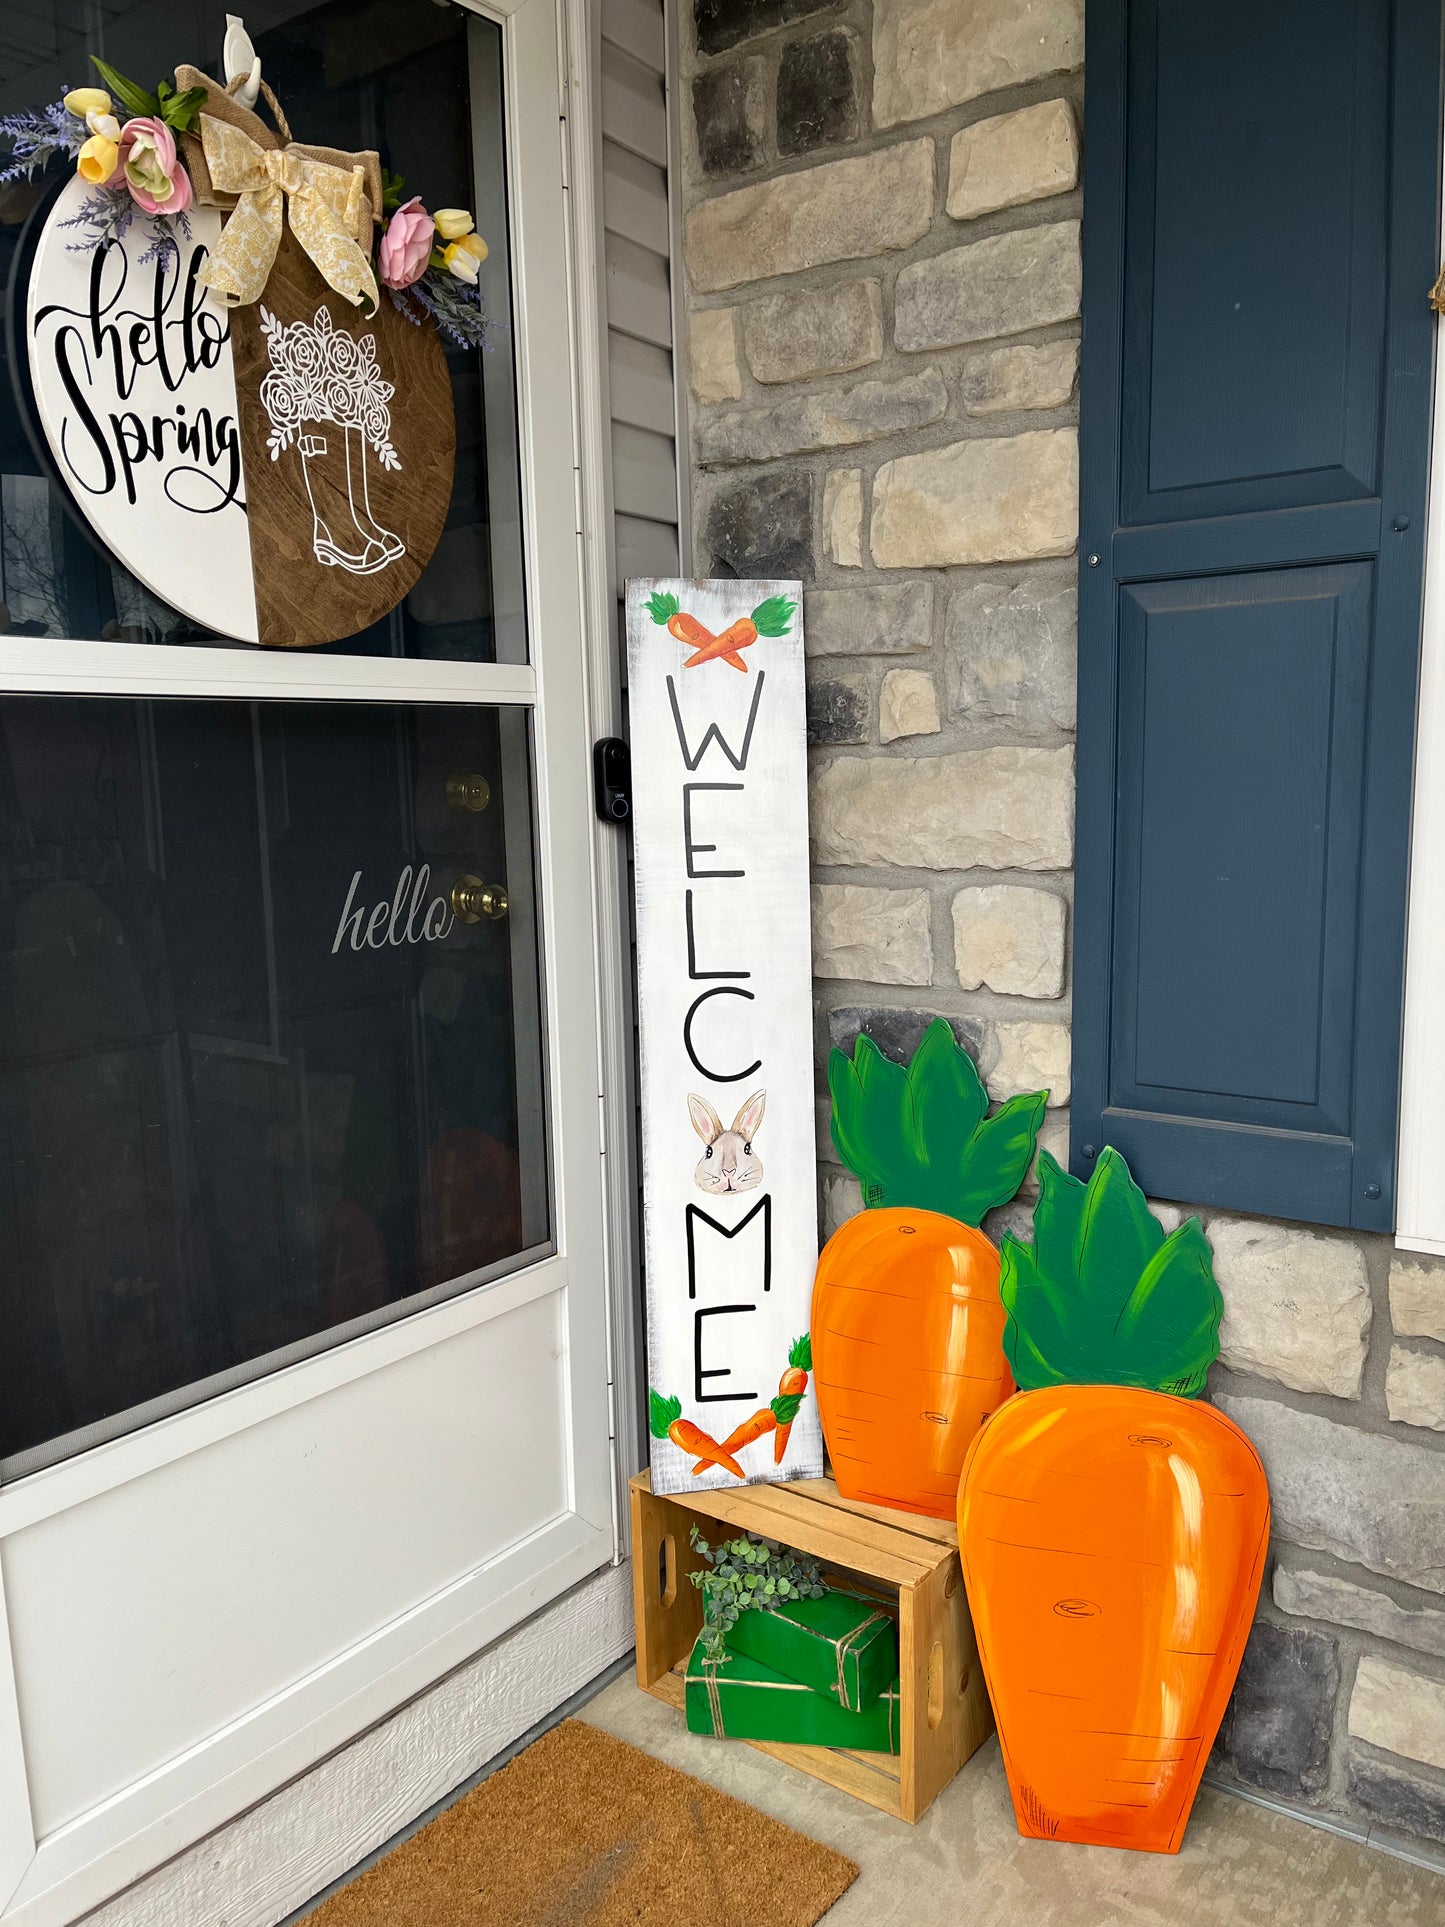 Welcome Easter bunny with carrots welcome sign with a painted bunny